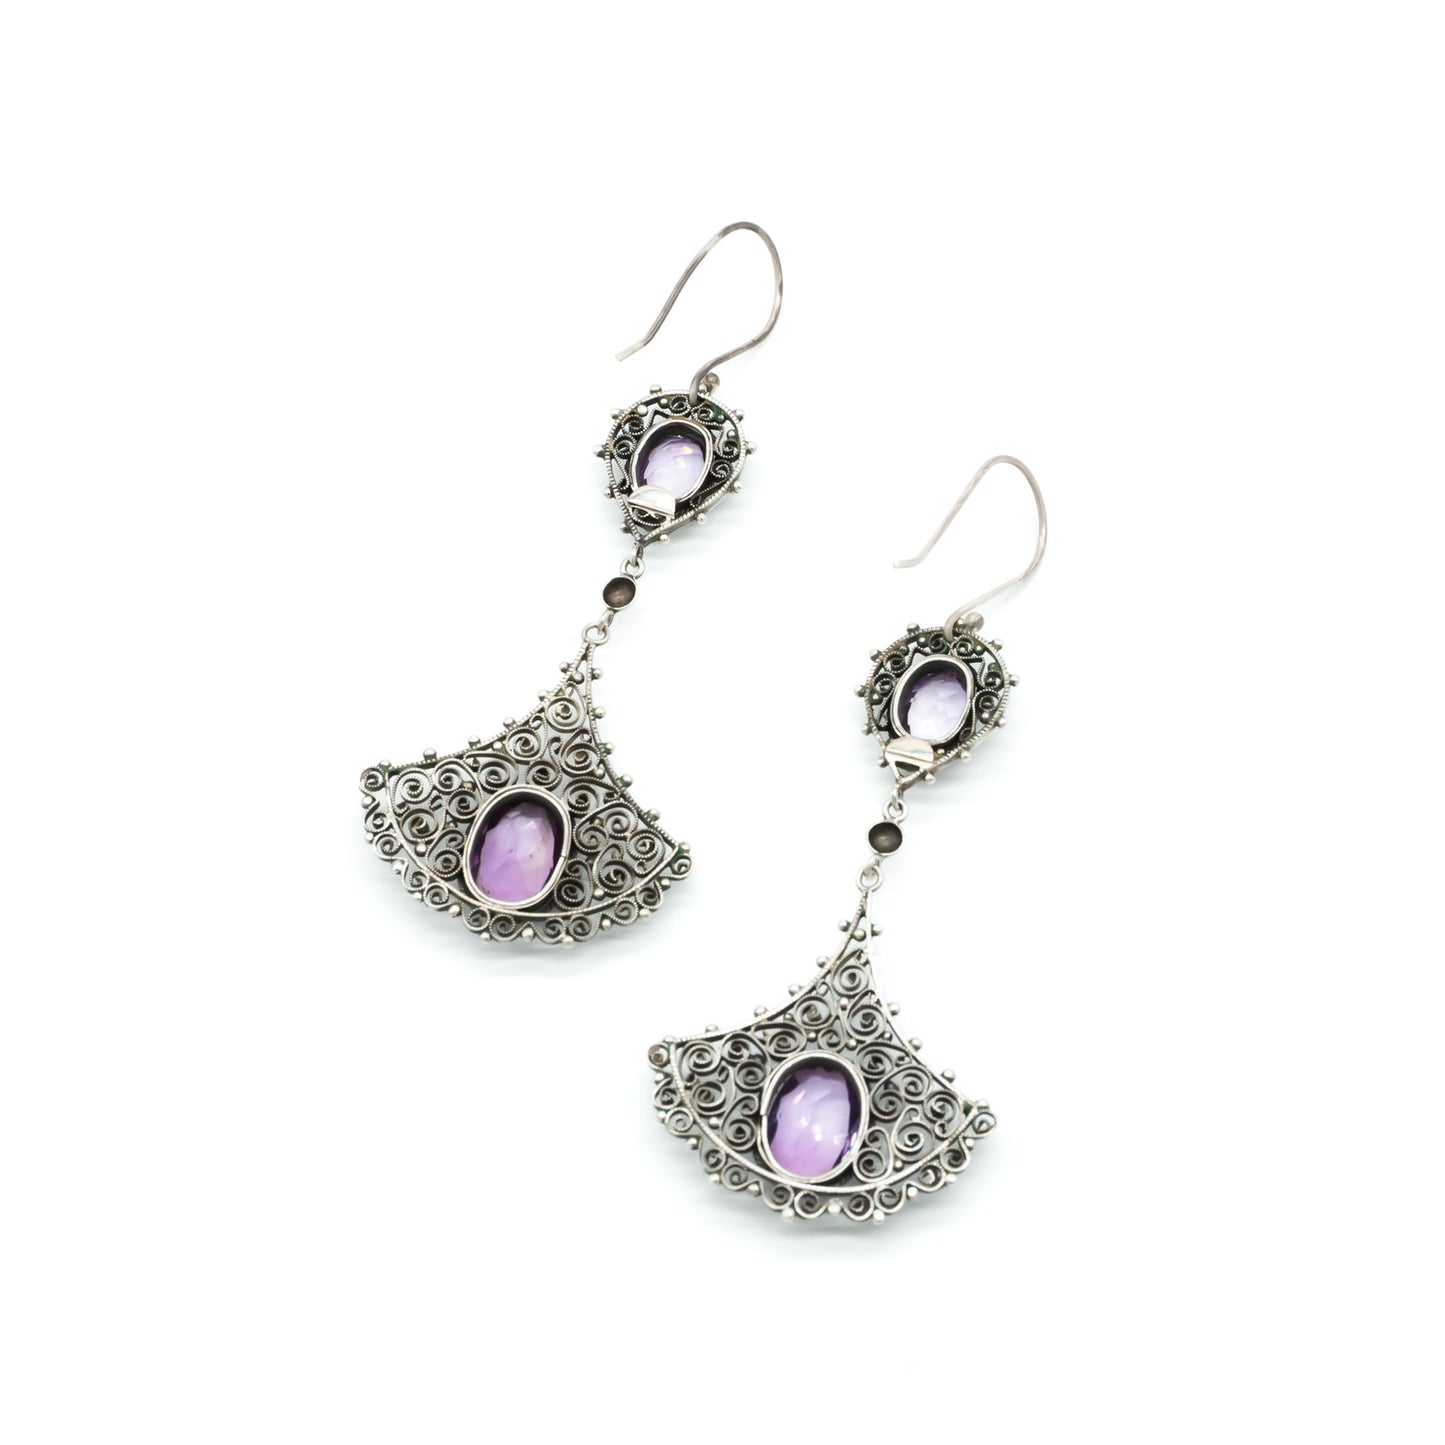 Large silver drop earrings with intricate filigree detail, each set with two beautifully faceted amethysts. Circa 1930’s